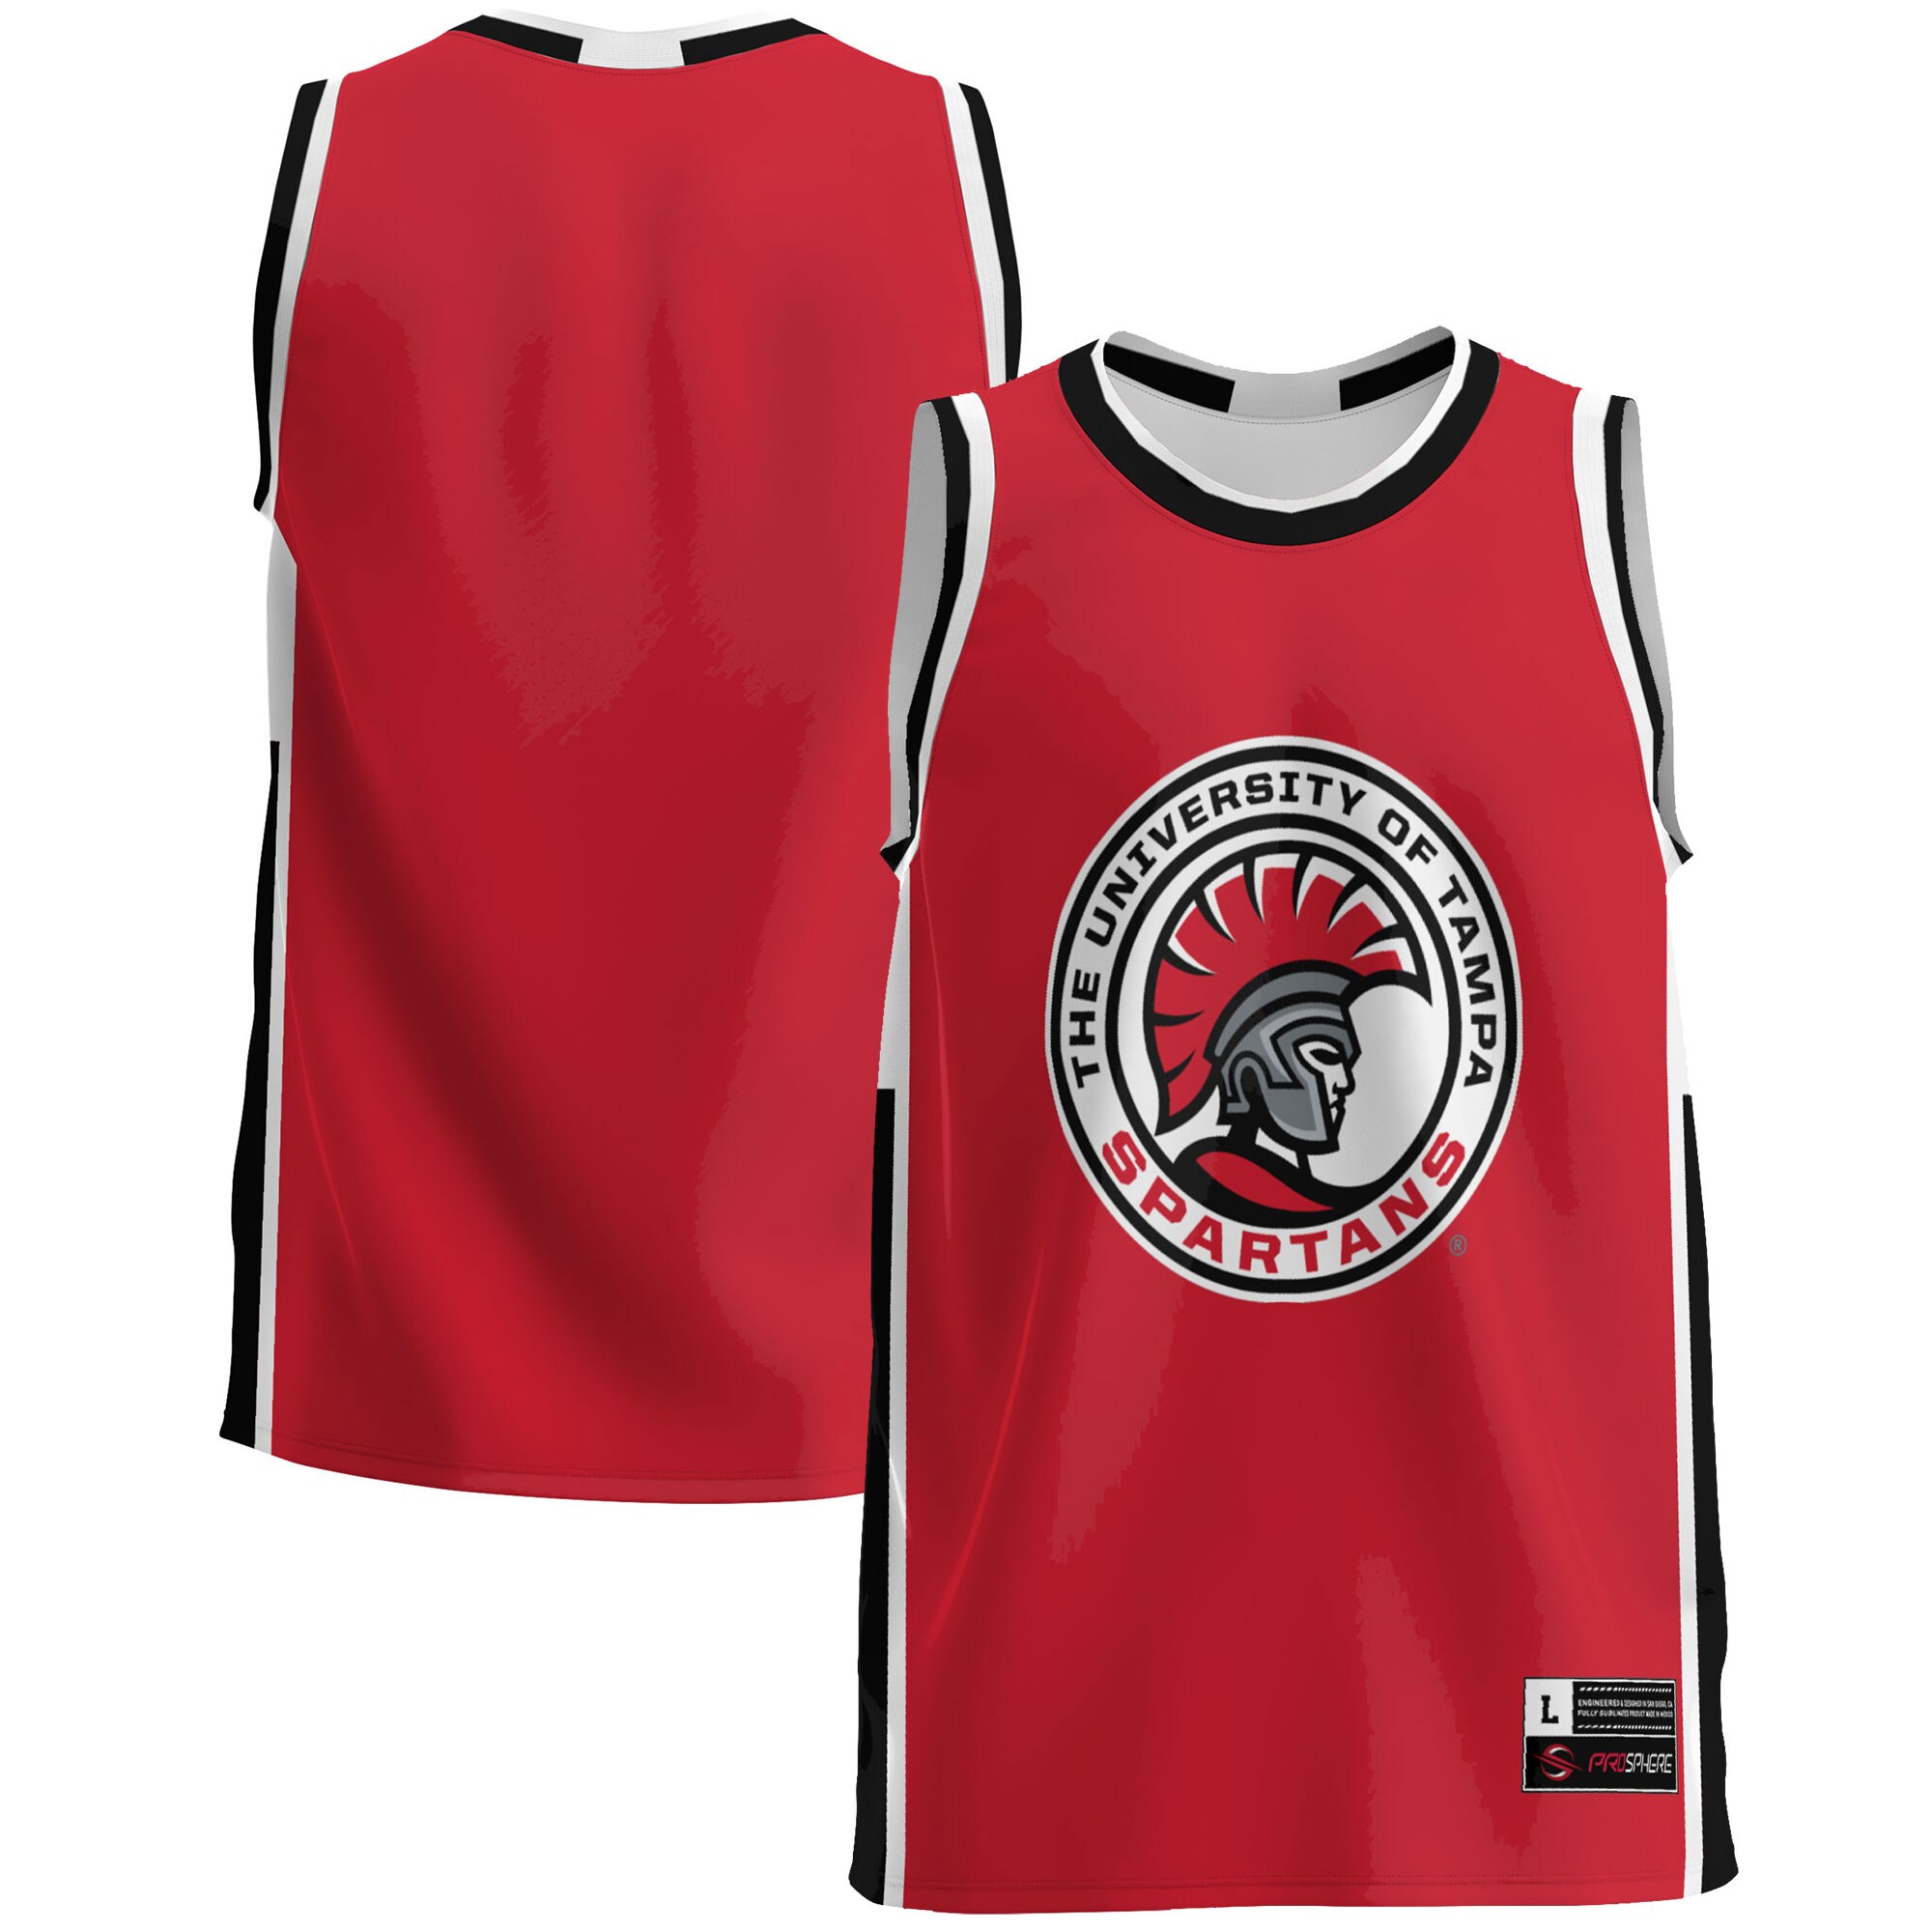 University of Tampa Spartans Basketball Jersey - Red For Youth Women Men